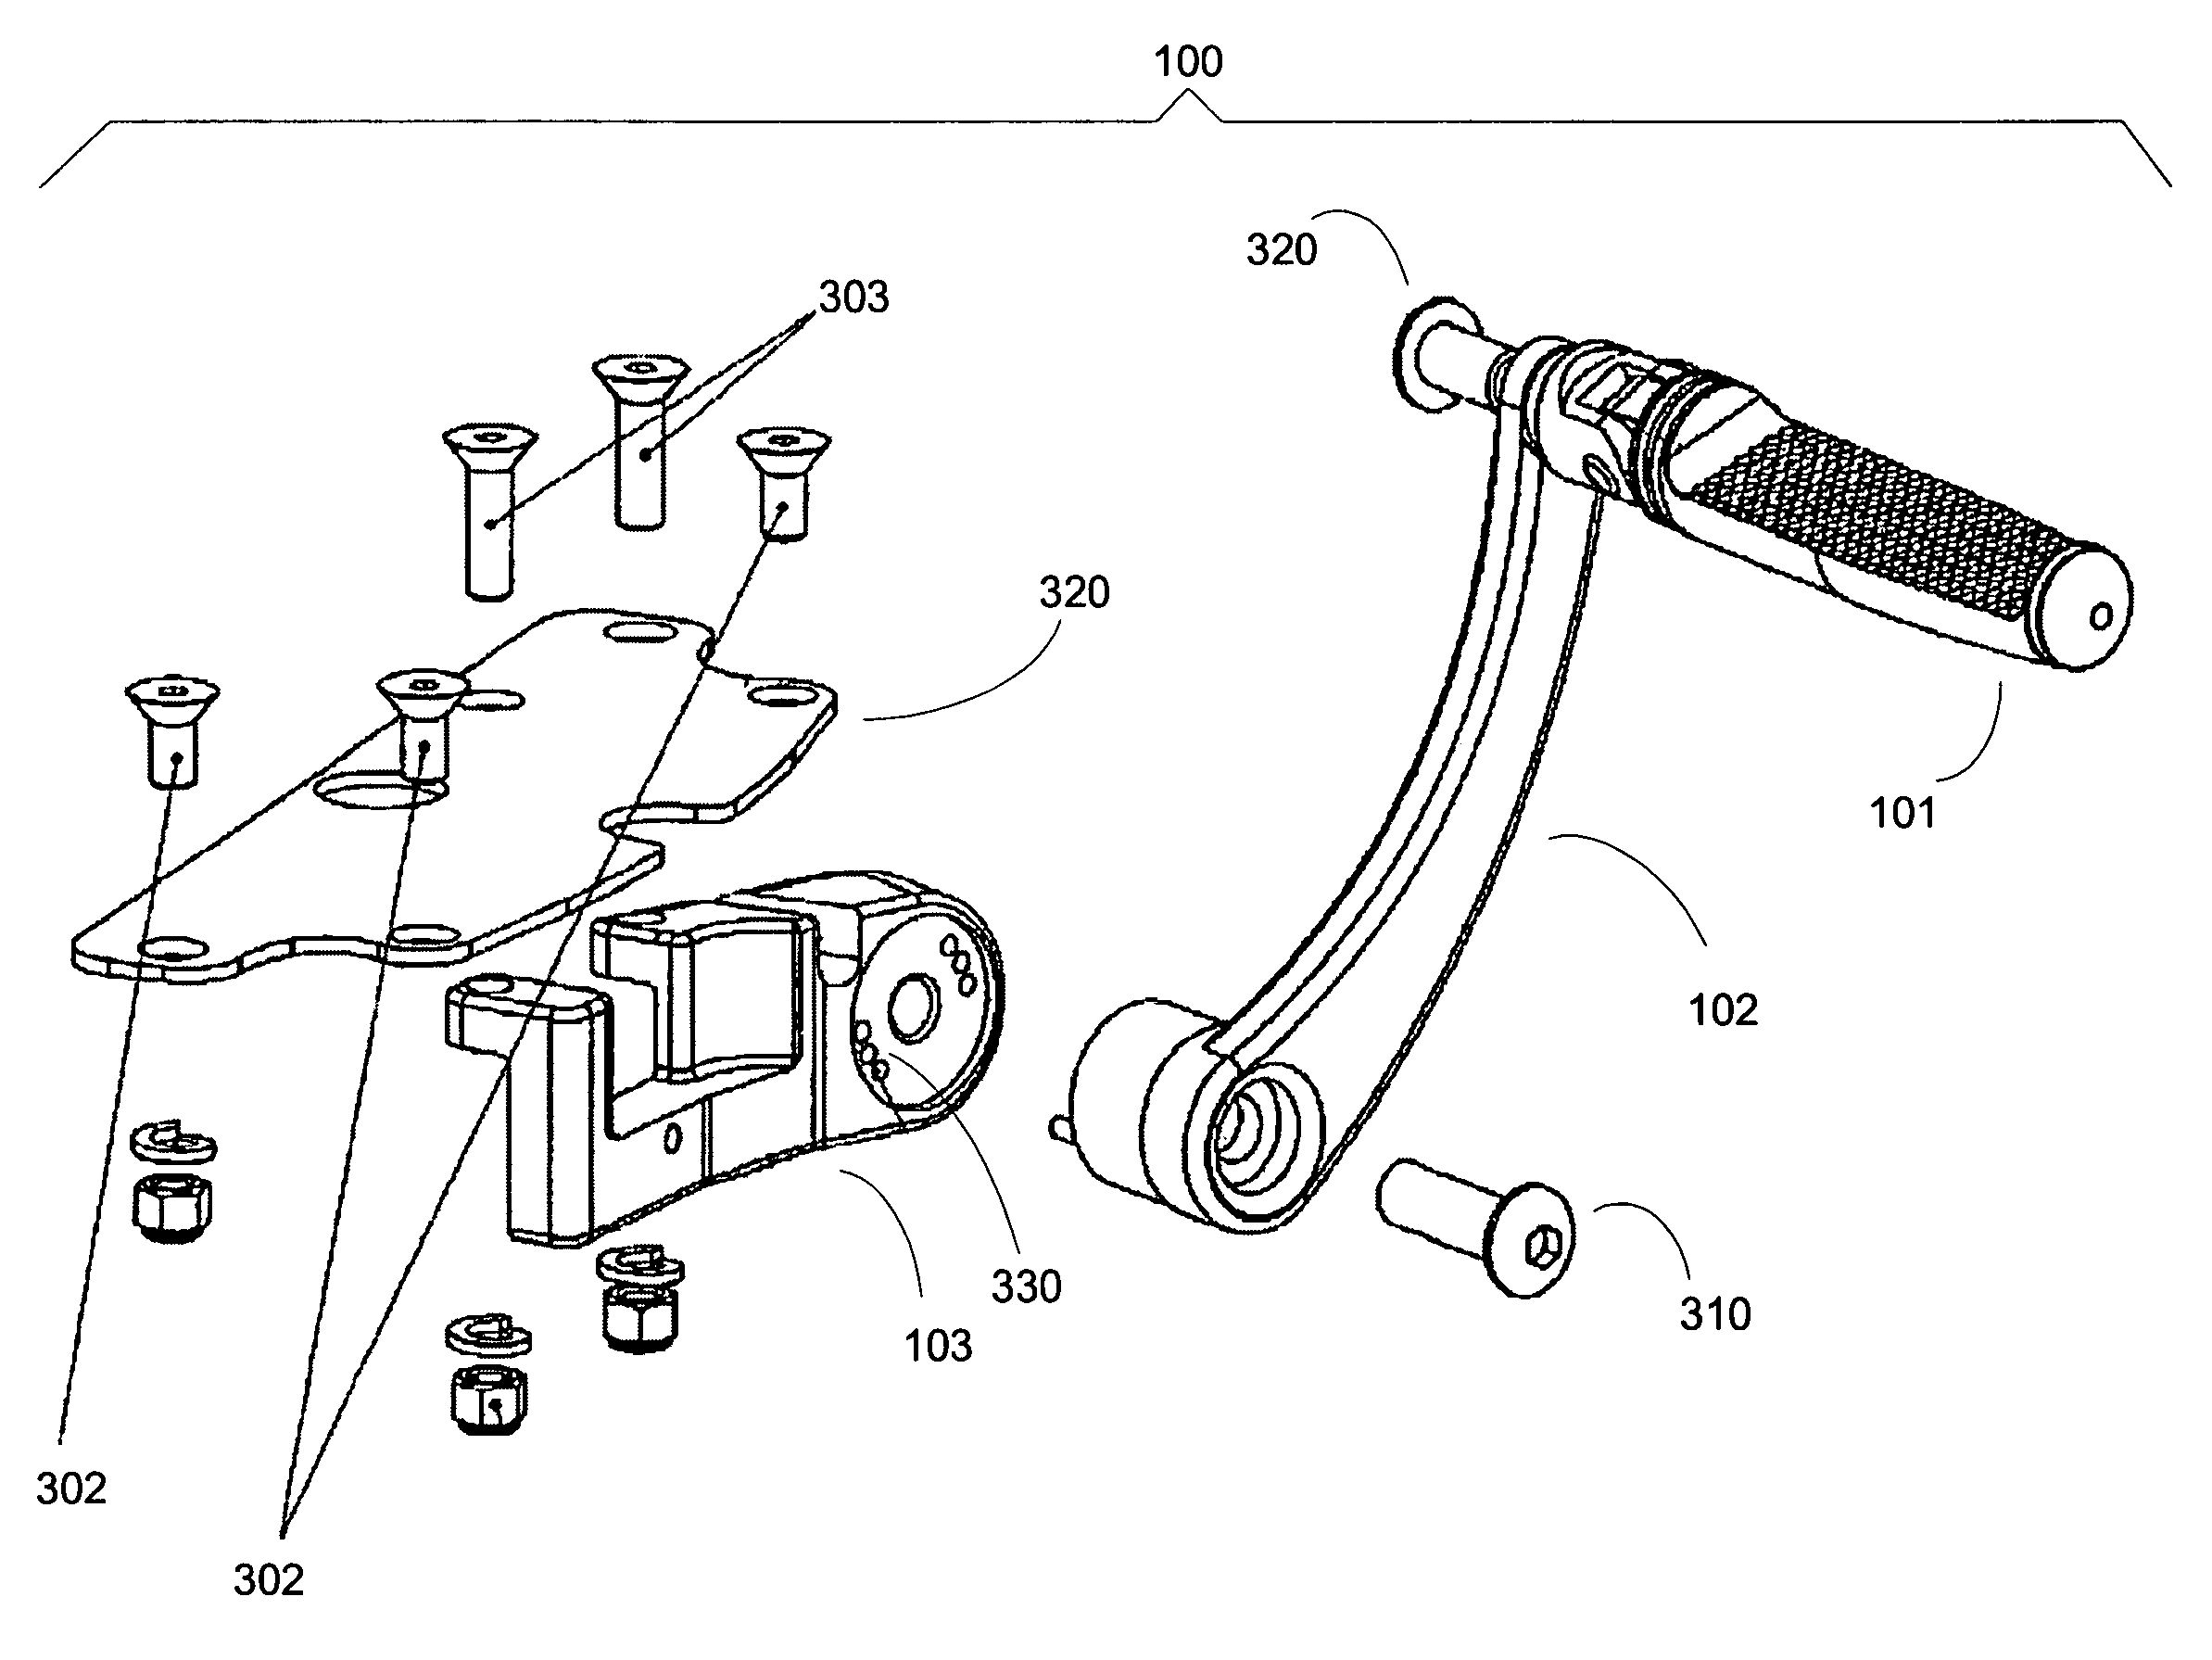 Floorboard mounted foot peg apparatus and method for a motorcycle